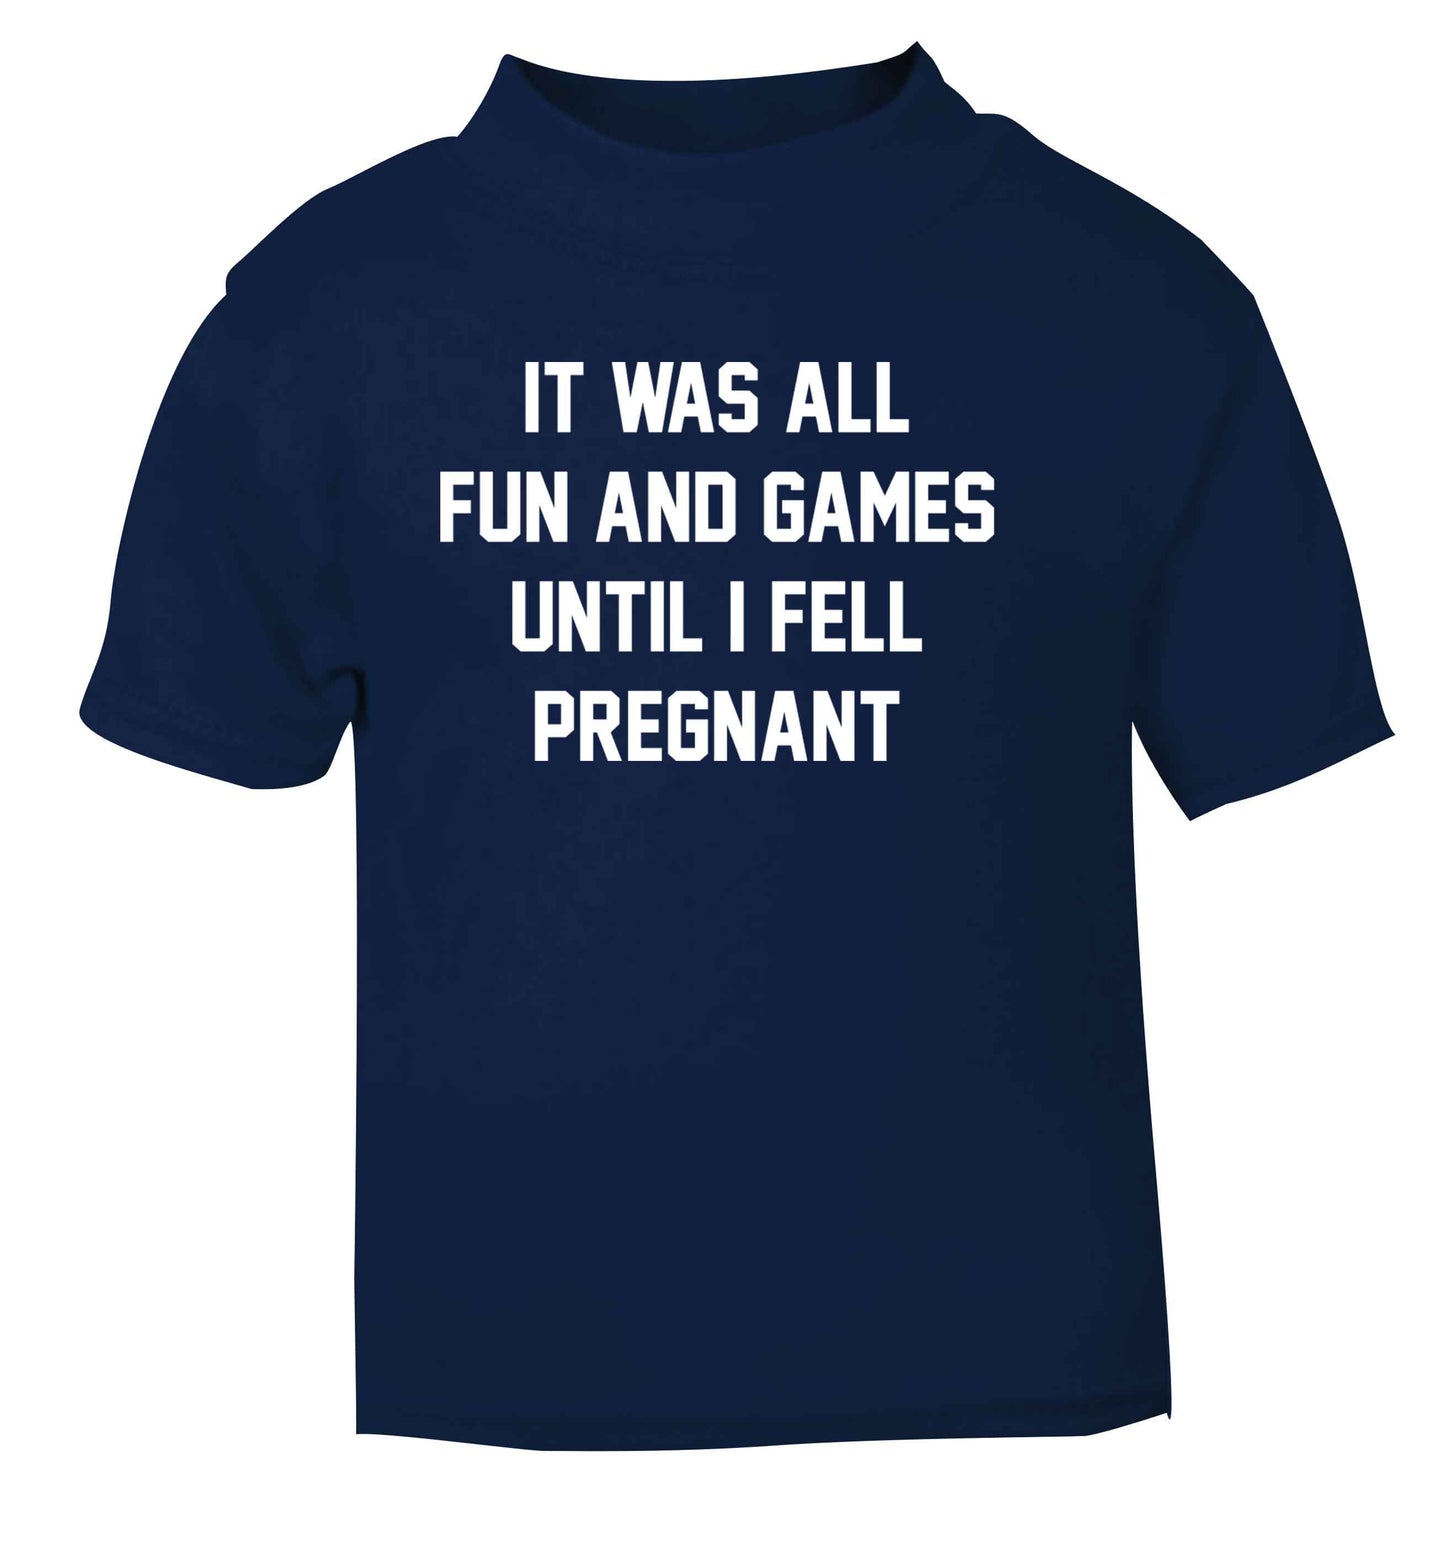 It was all fun and games until I fell pregnant kicks navy Baby Toddler Tshirt 2 Years